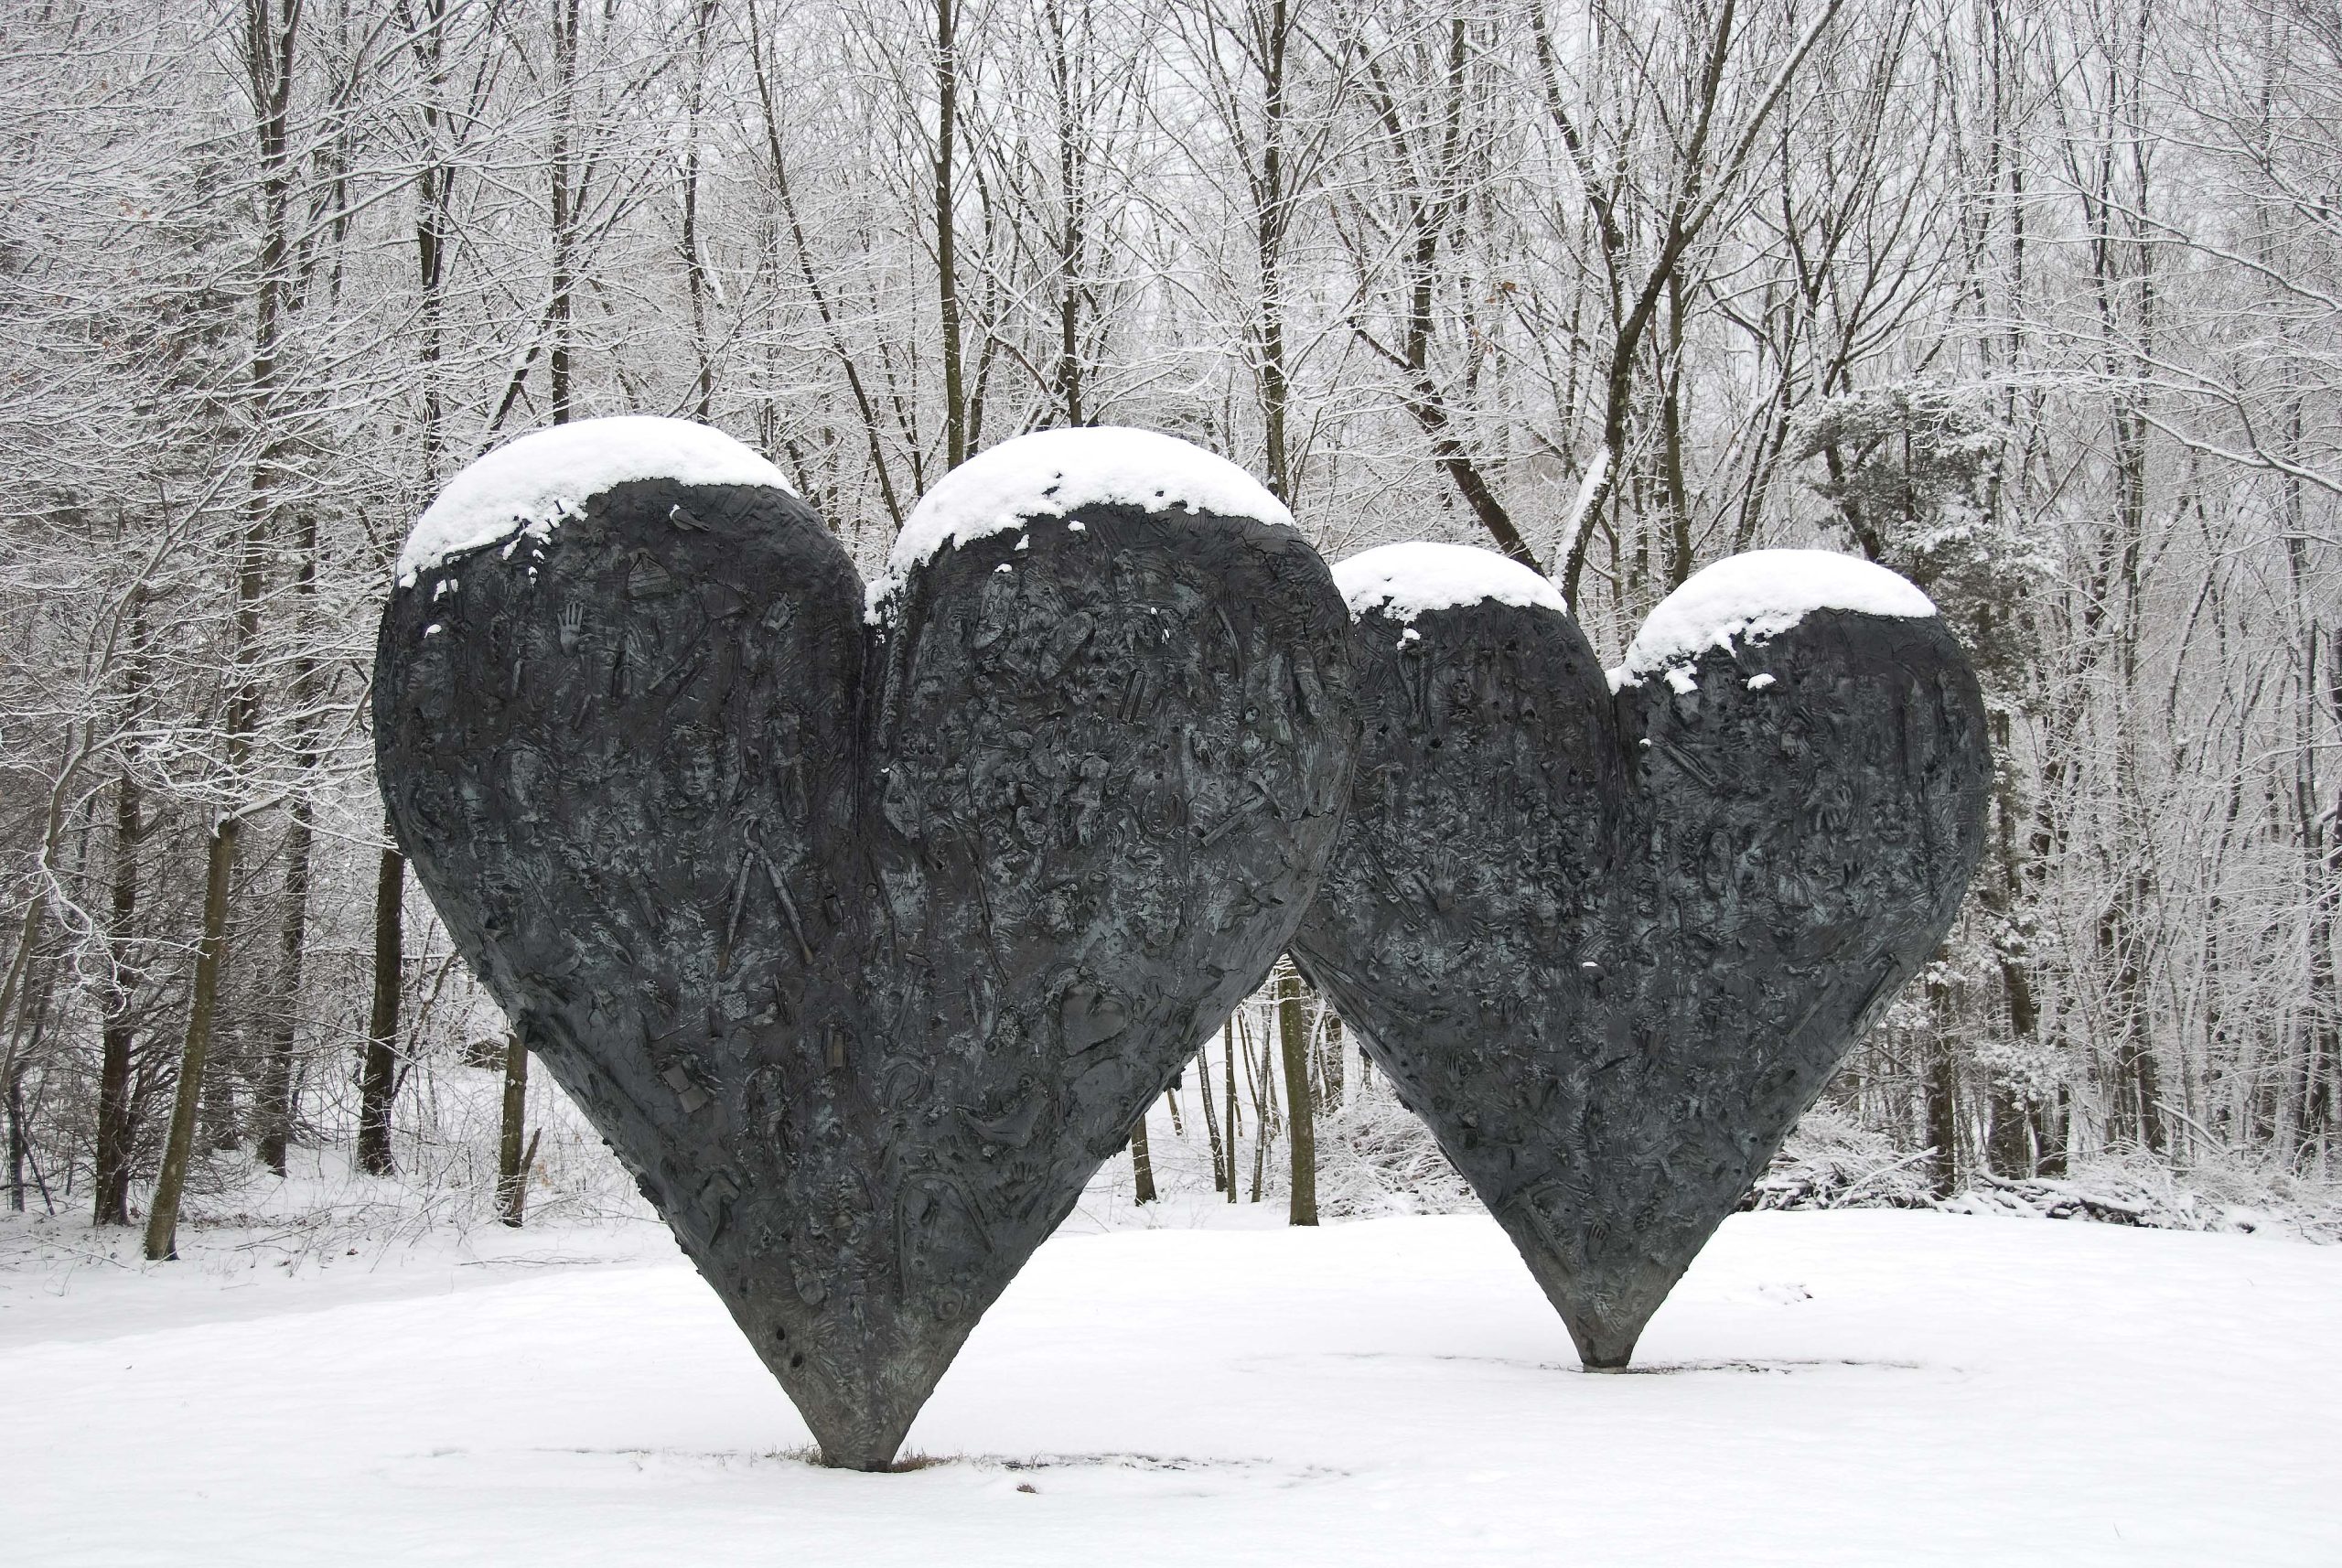 Jim Dine&#8217;s Heart Sculpture, Decordova (user submitted)